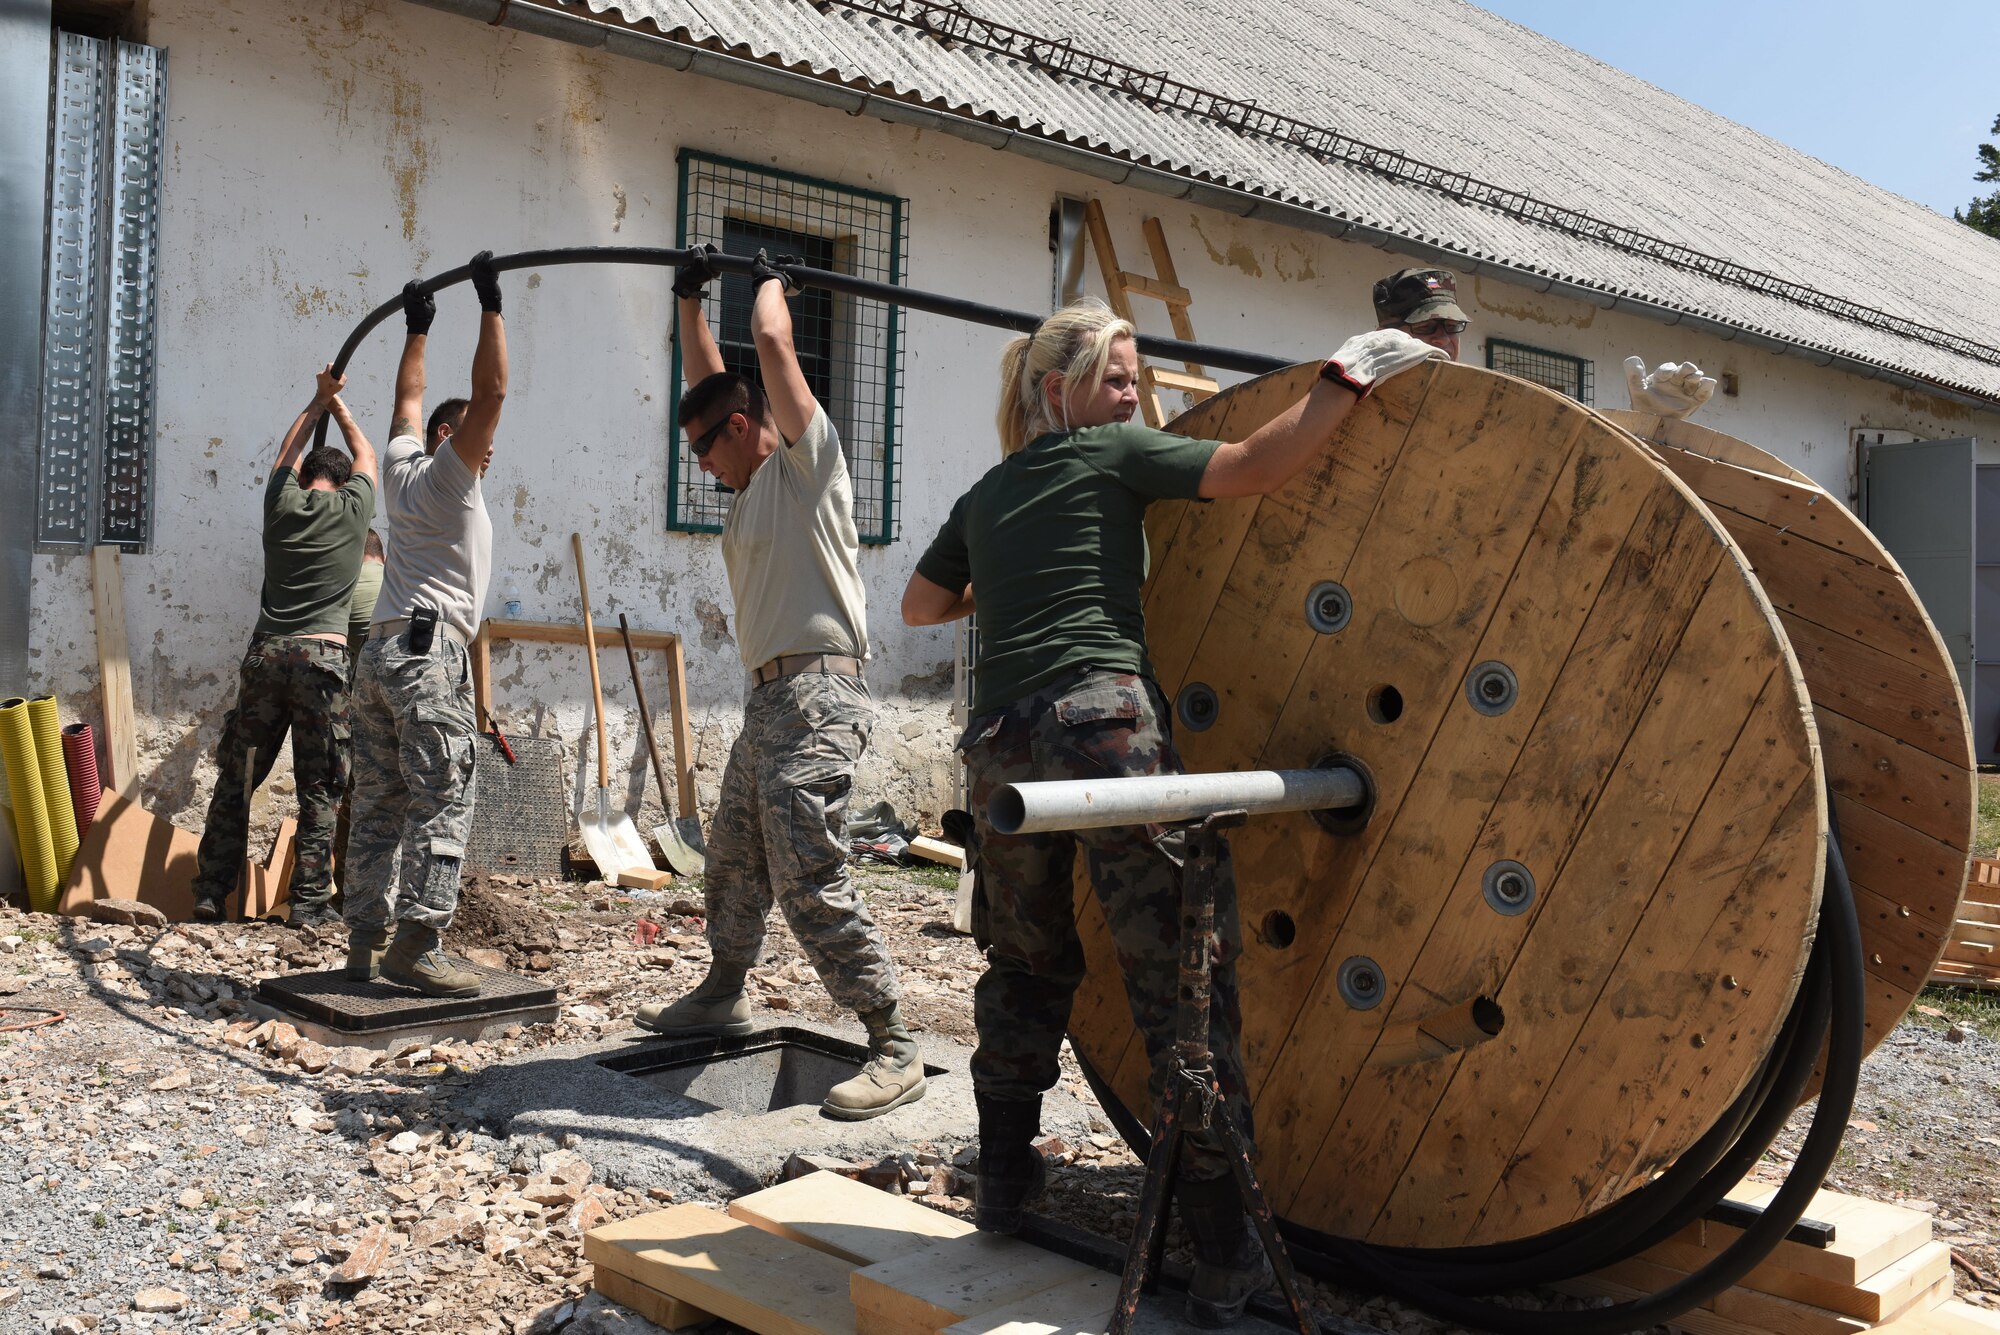 Members of the Colorado Air National Guard and  Slovenian Armed Forces (SAF) work together to pull a main power cable at Pocek Range, near Postonja, Slovenia, July 22, 2015. The SAF provided troops to assist Colorado Guardsmen restoring a historically old barn into a usable range facility to be used by SAF and NATO countries for joint, multinational training and exercises. (U.S. Air National Guard photo by Senior Airman Michelle Y. Alvarez-Rea/Released.)